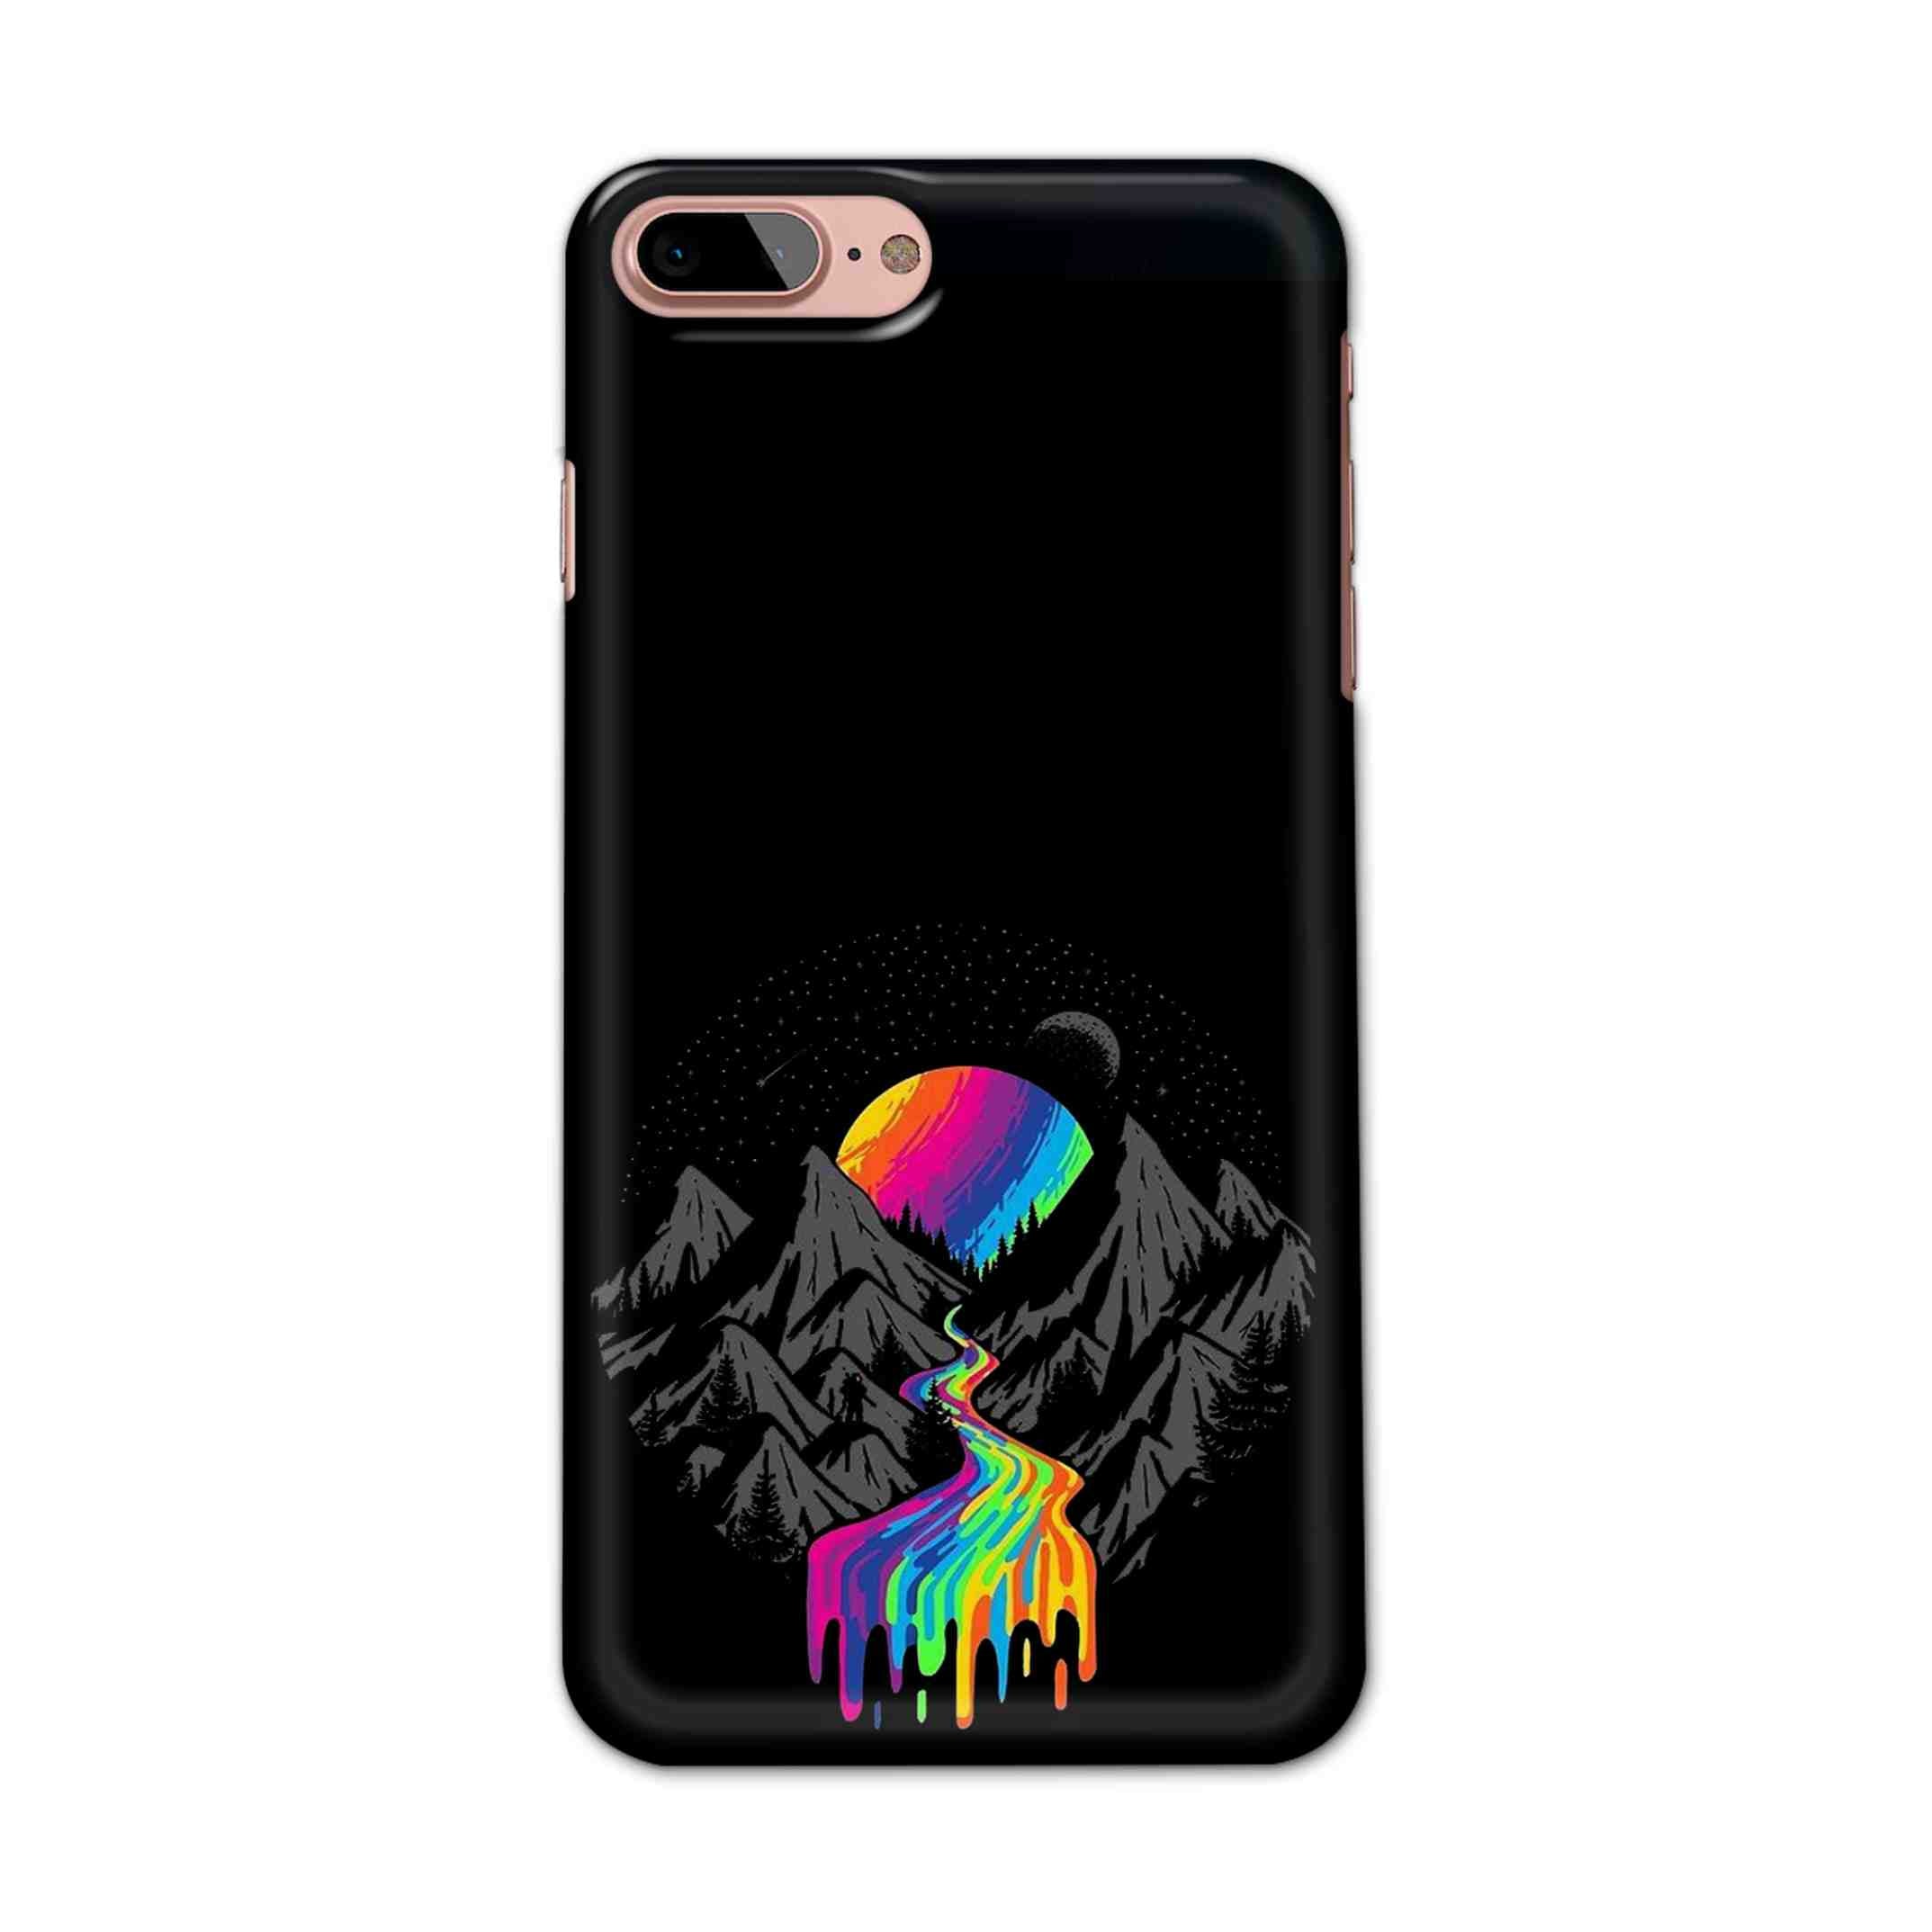 Buy Neon Mount Hard Back Mobile Phone Case/Cover For iPhone 7 Plus / 8 Plus Online